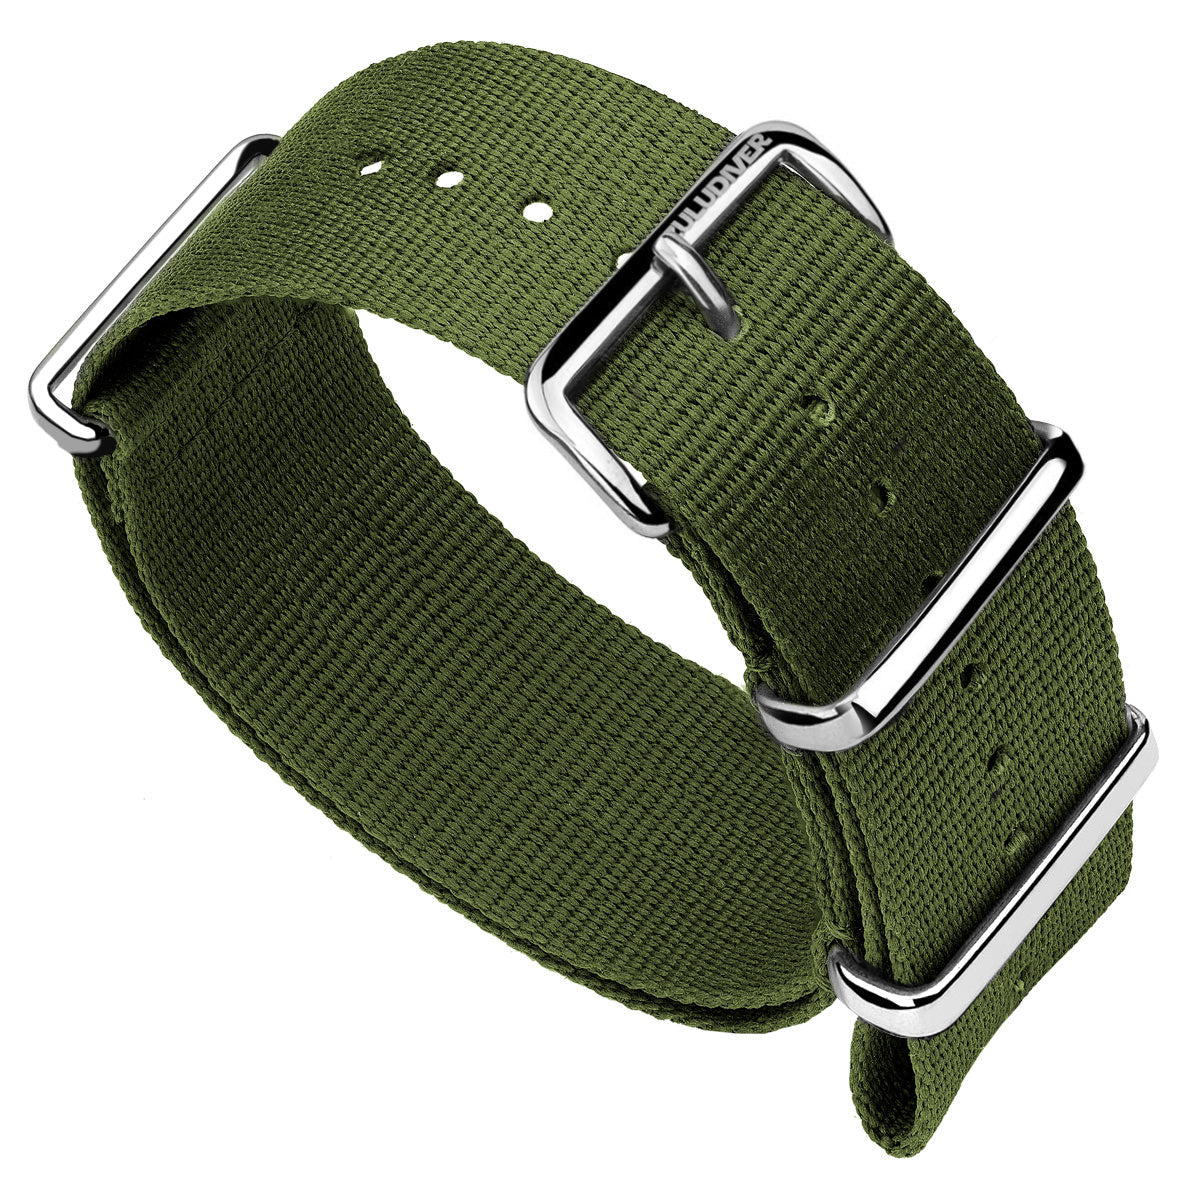 1973 British Military Watch Strap: CADET - Army Green, Polished